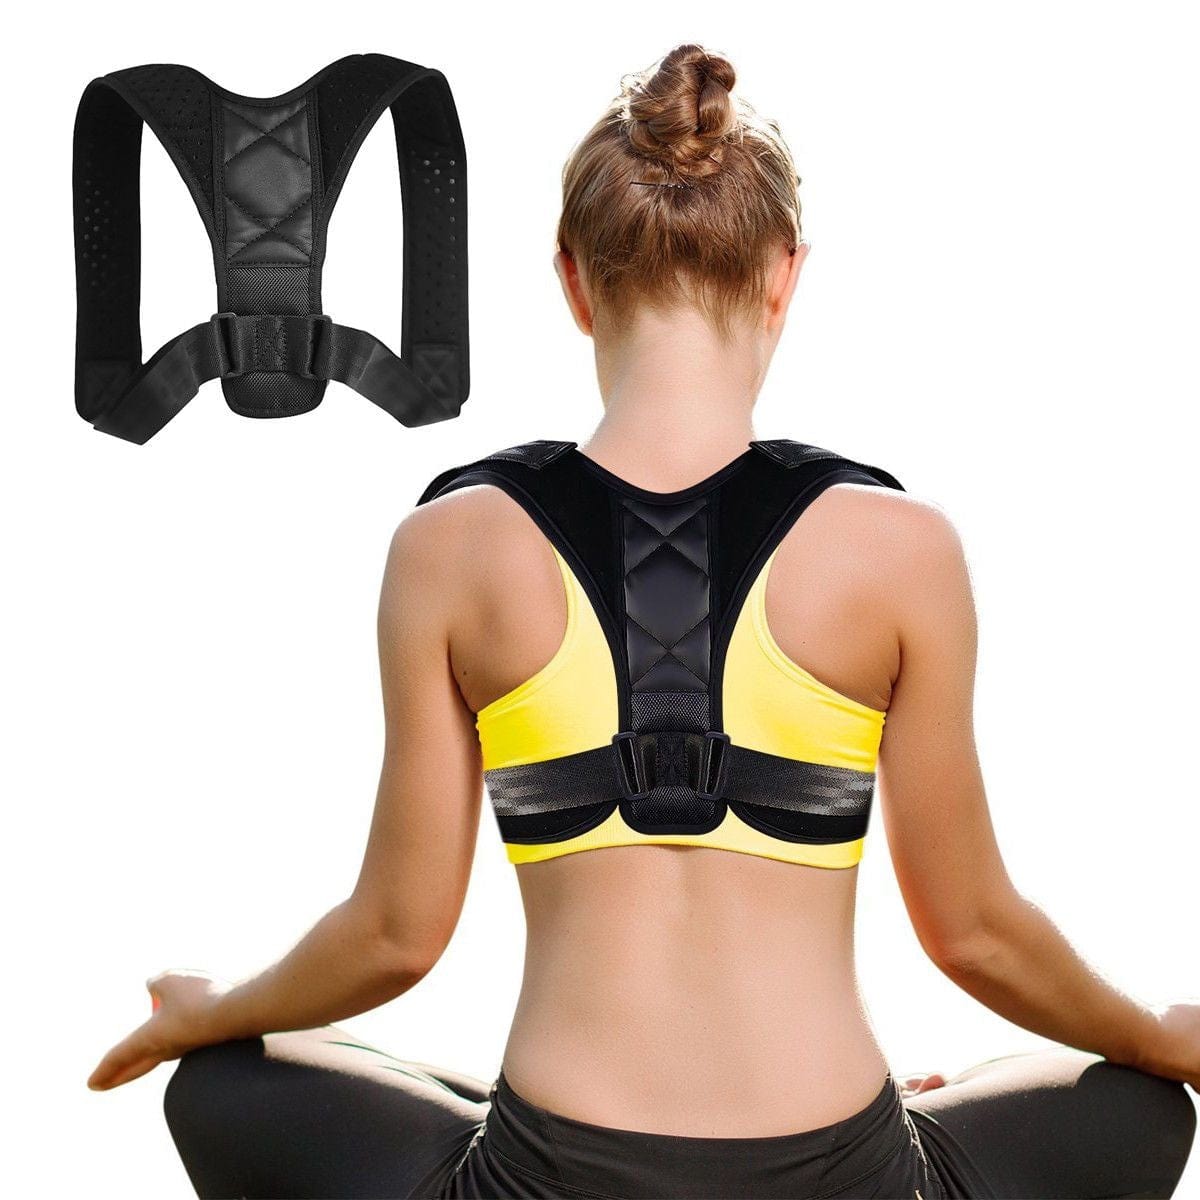  ERGONIX Lumbar Support Posture Corrector Chair for Men – Large  Ergonomic Back Support Chair for Posture Correction and Lower Back Pain  Relief – Portable Lumbar Support Posture Corrector for Chair 